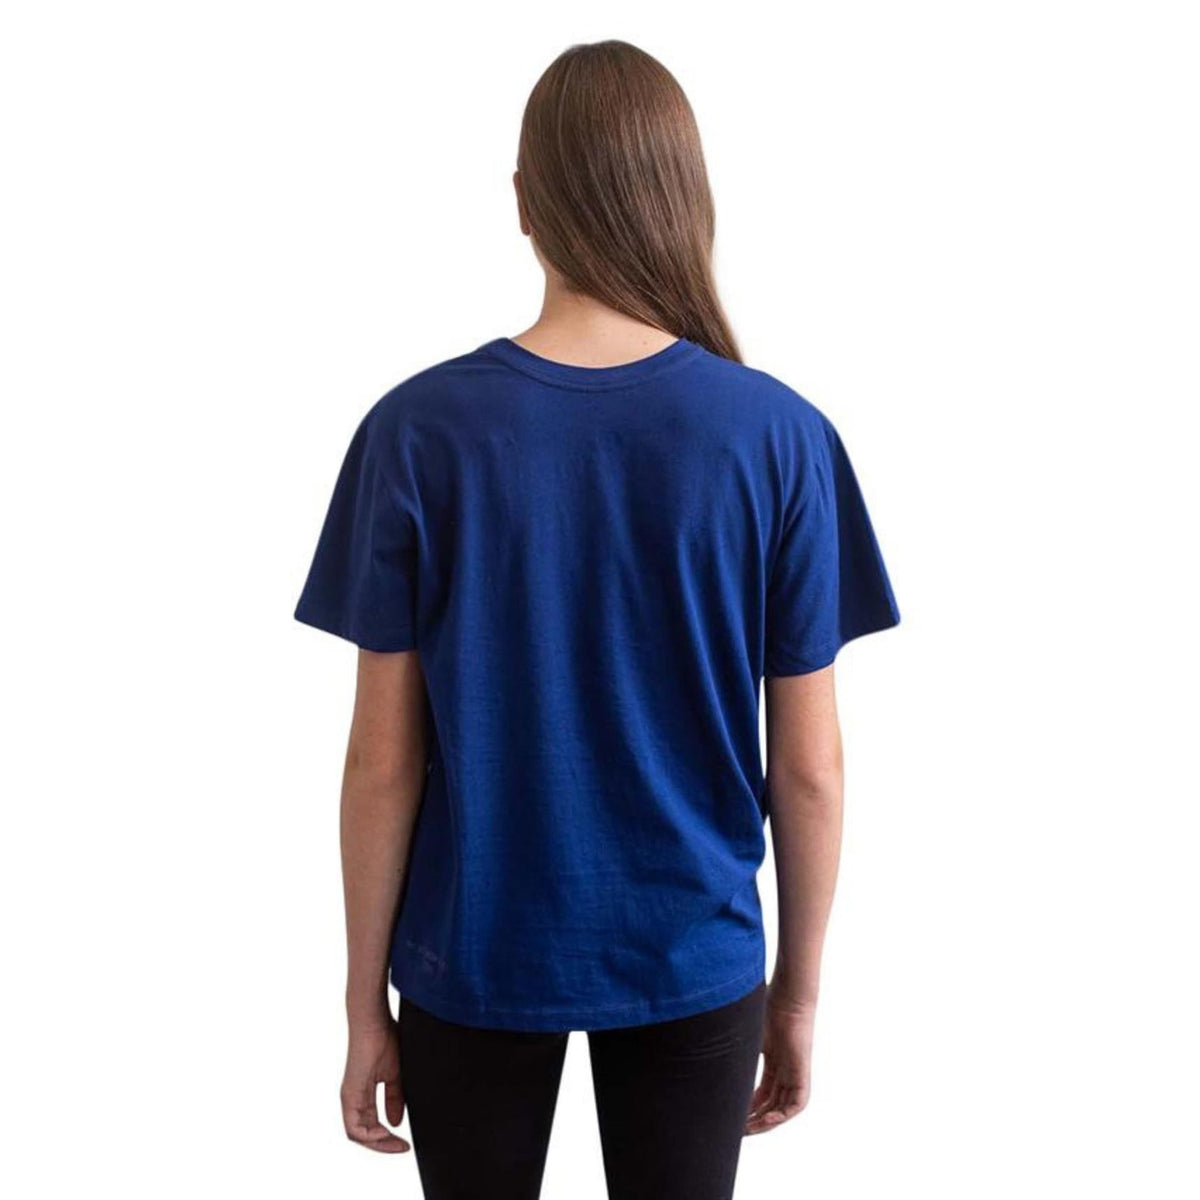 The Side Opening T-Shirt -Kids sizing  The Shapes United T-shirt.